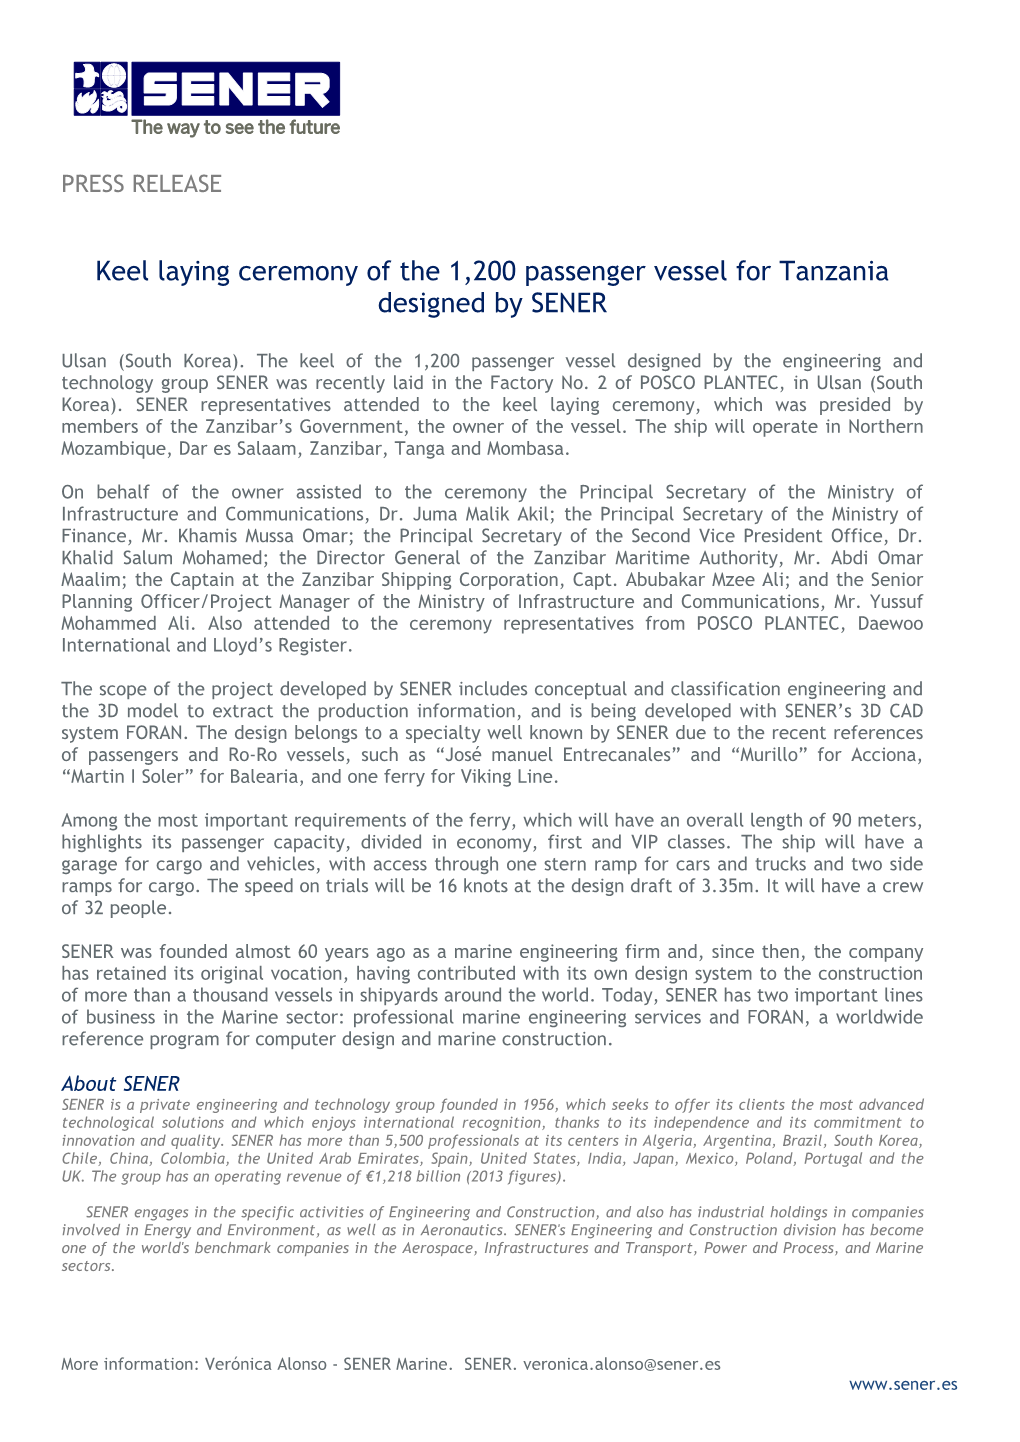 Keel Laying Ceremony of the 1,200 Passenger Vessel for Tanzania Designed by SENER